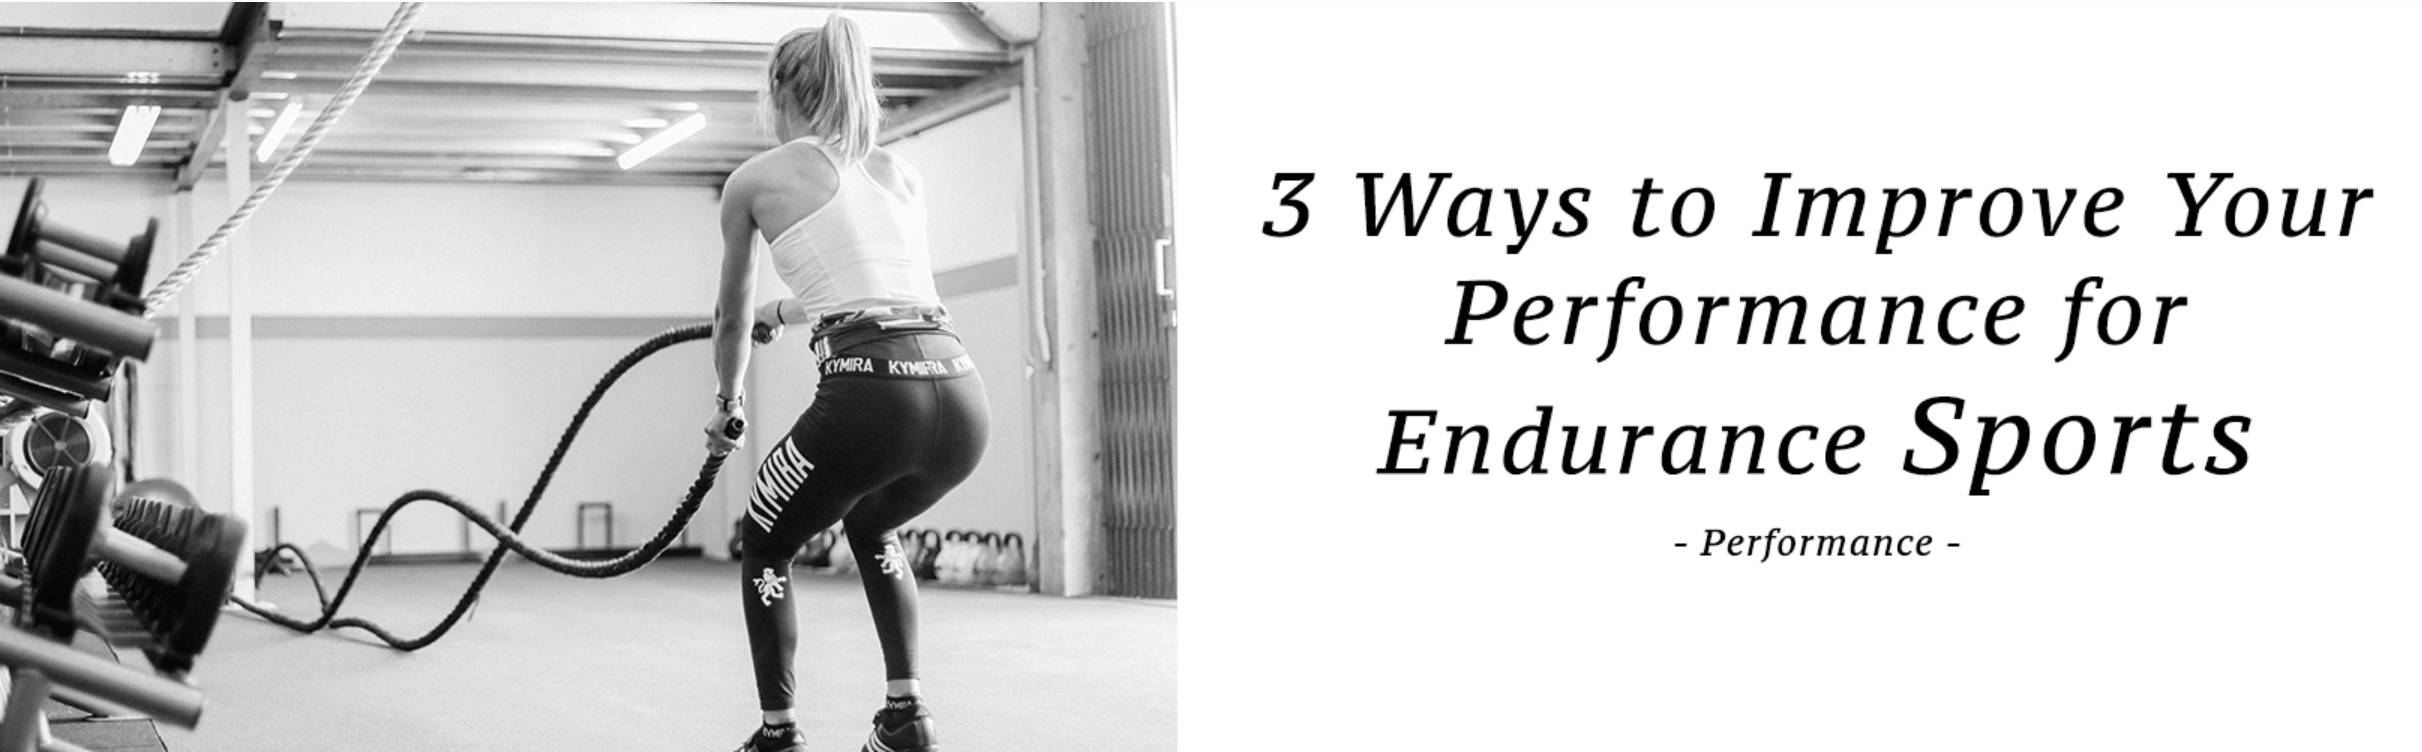 Increase endurance for sports